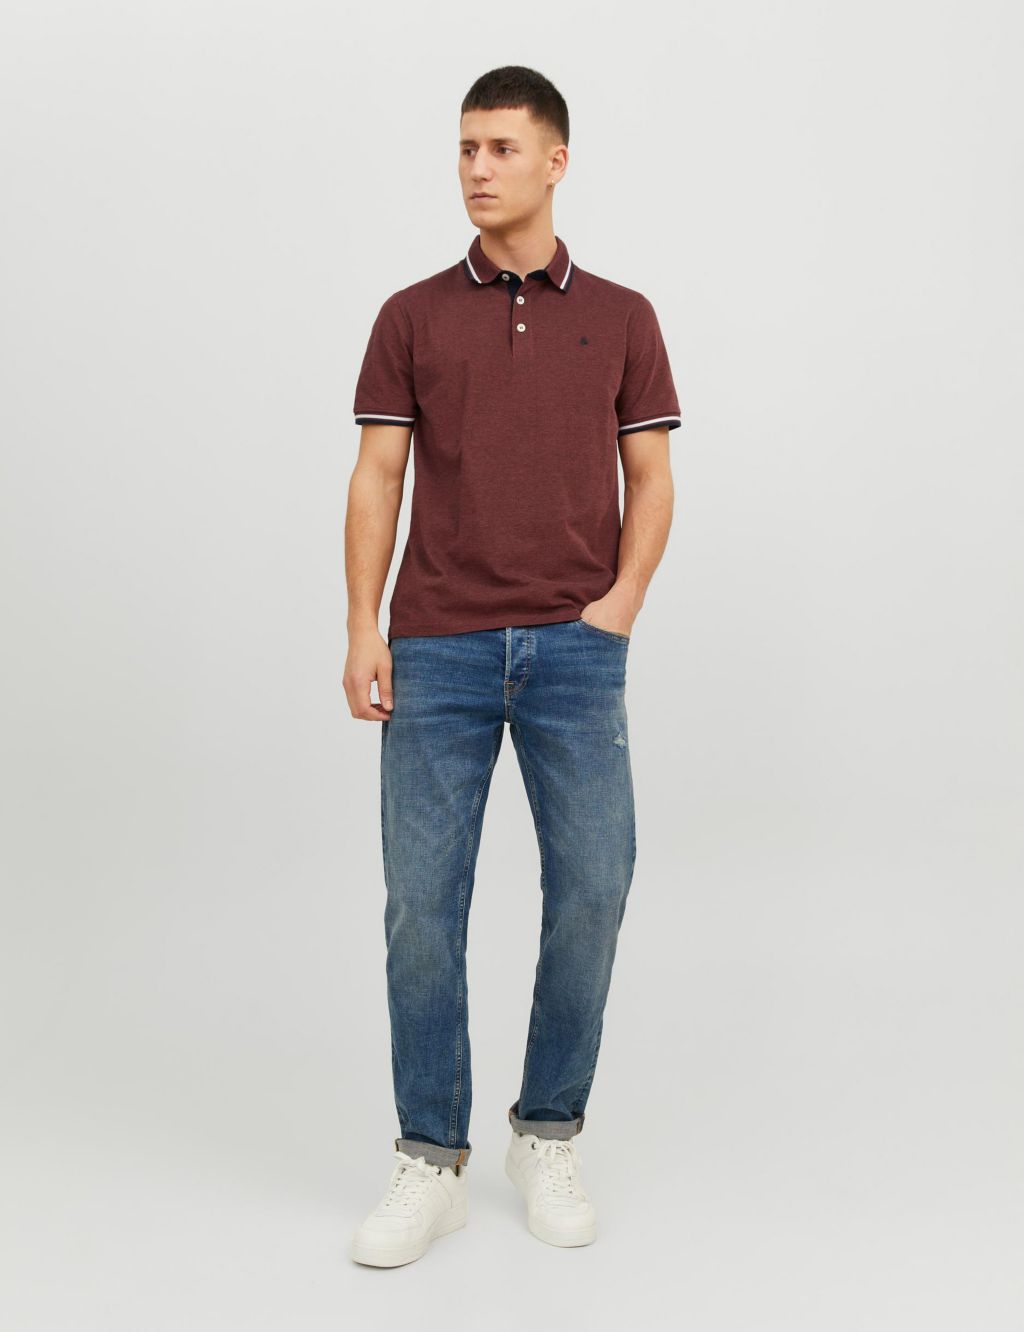 Slim Fit Pure Cotton Tipped Polo Shirt image 3